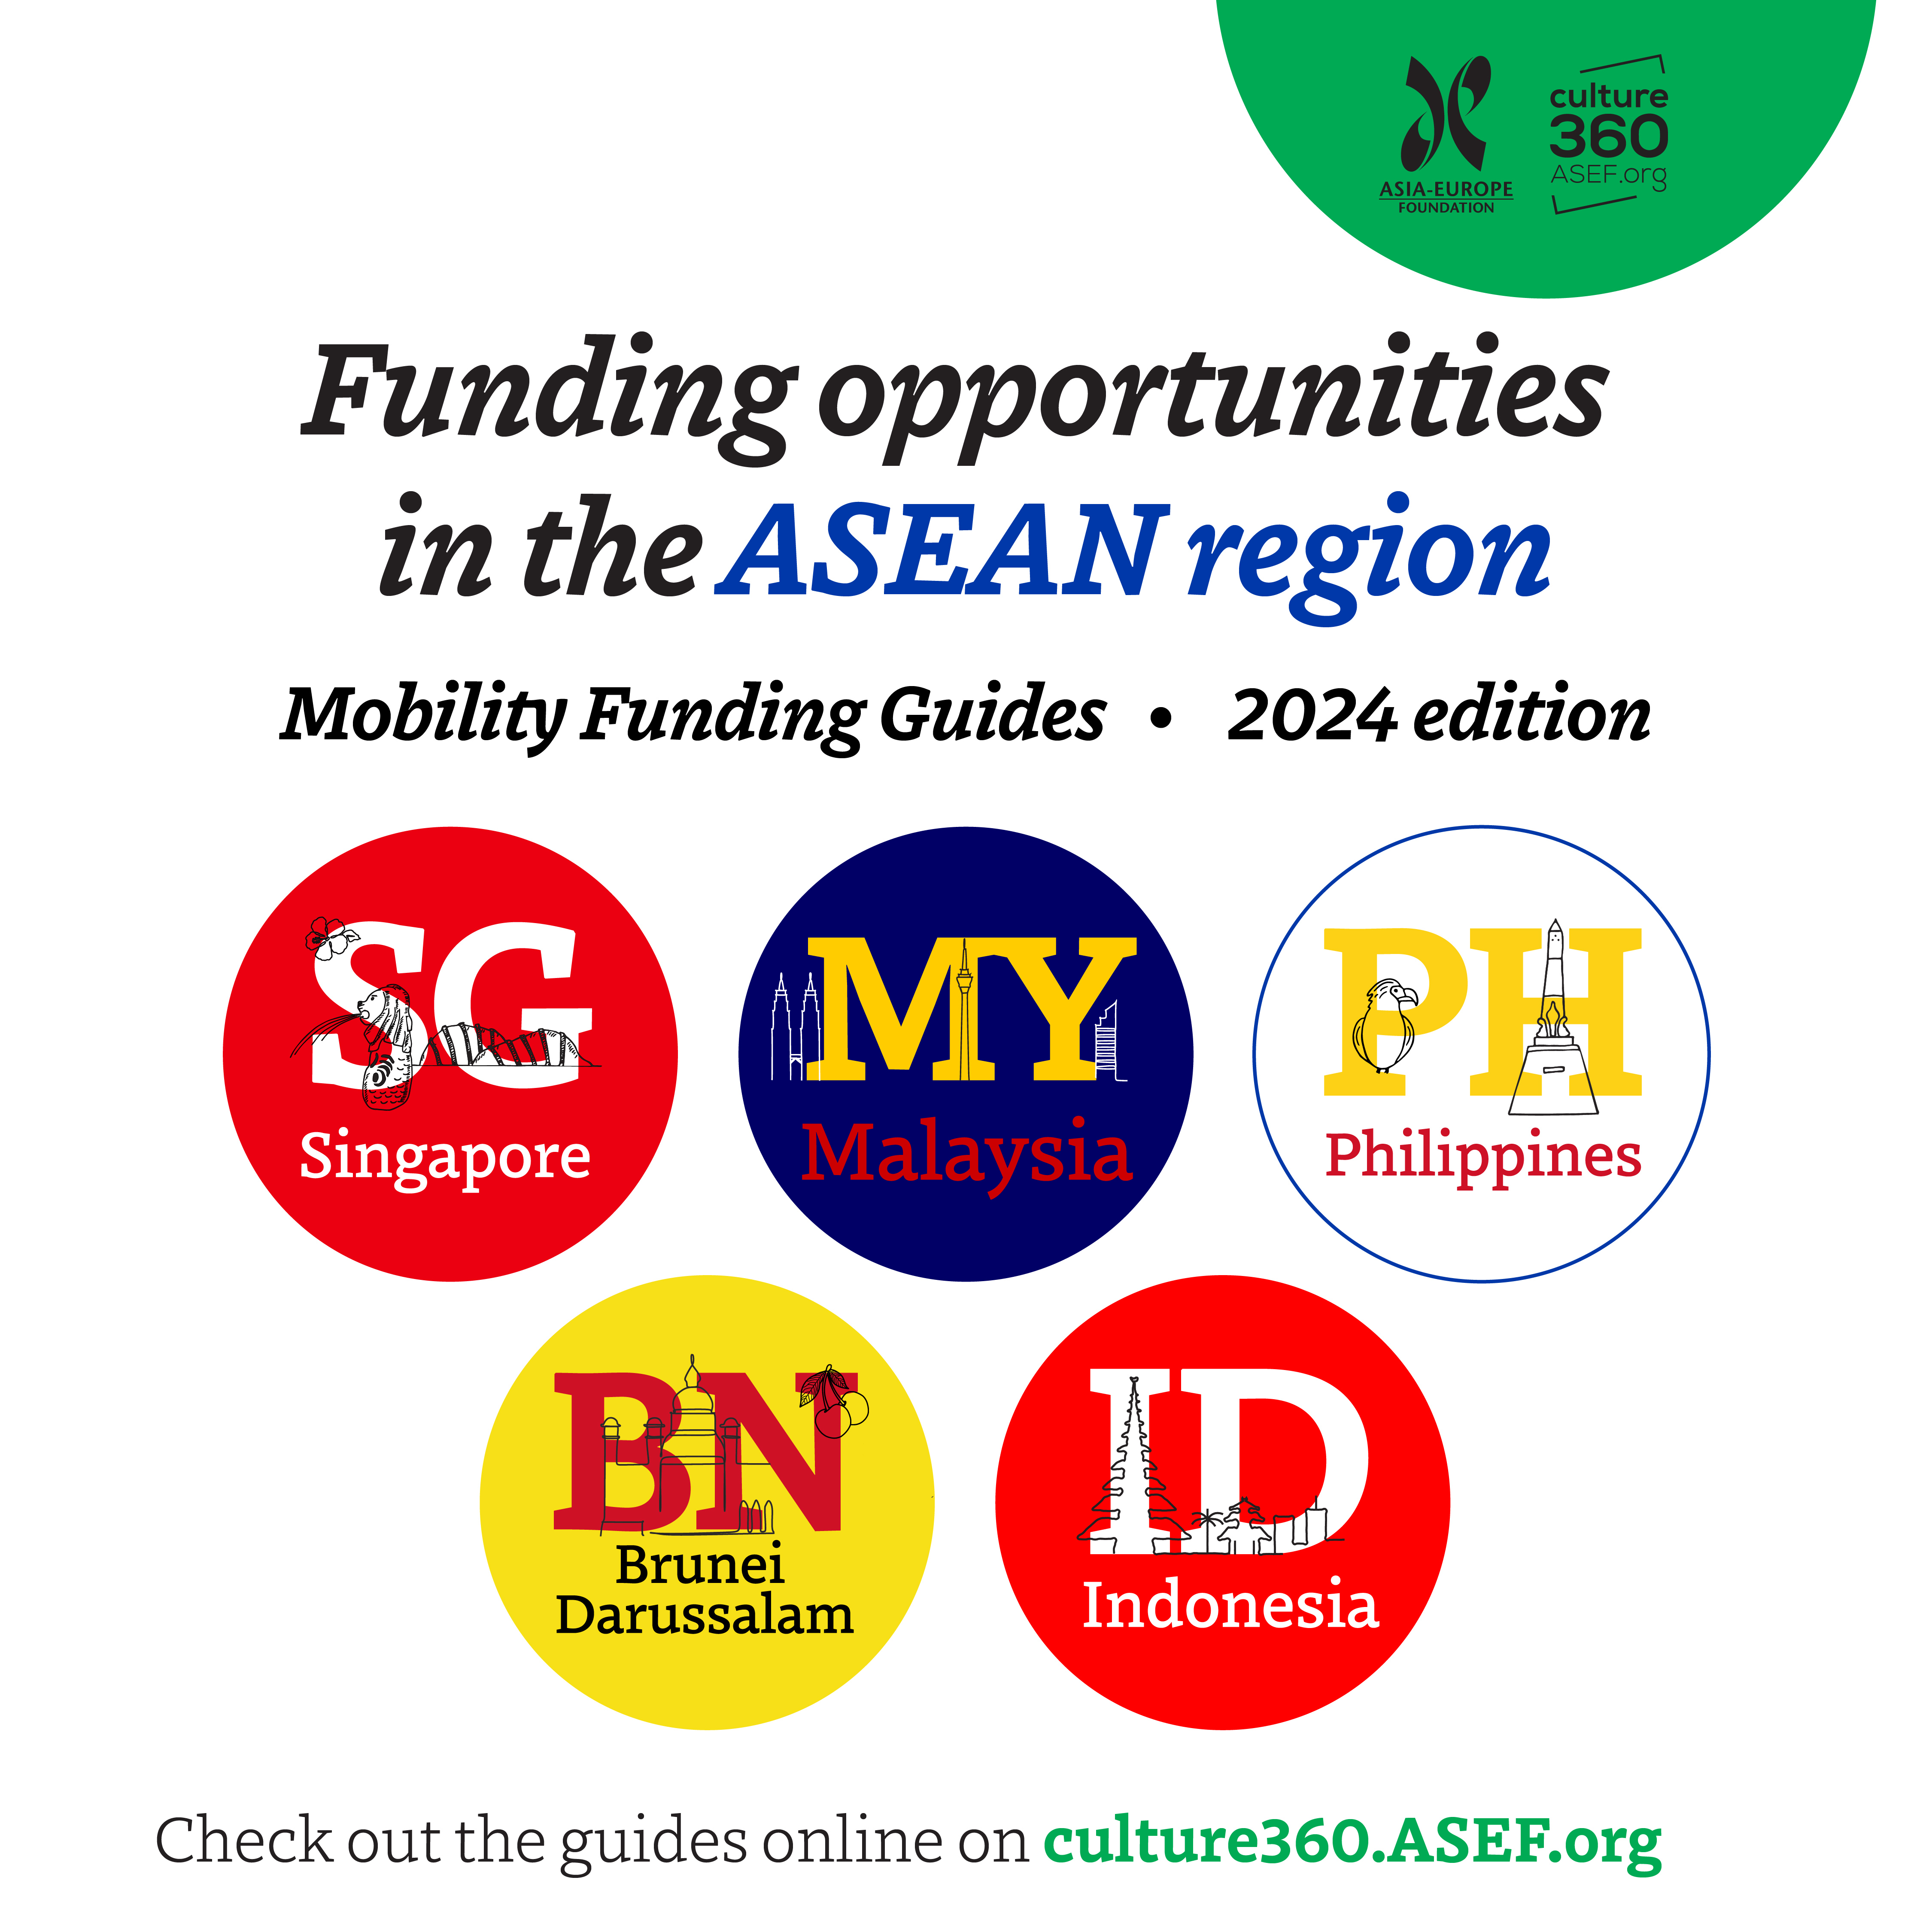 Mobility Funding Guides for ASEAN Region | 2024 Edition Launched!